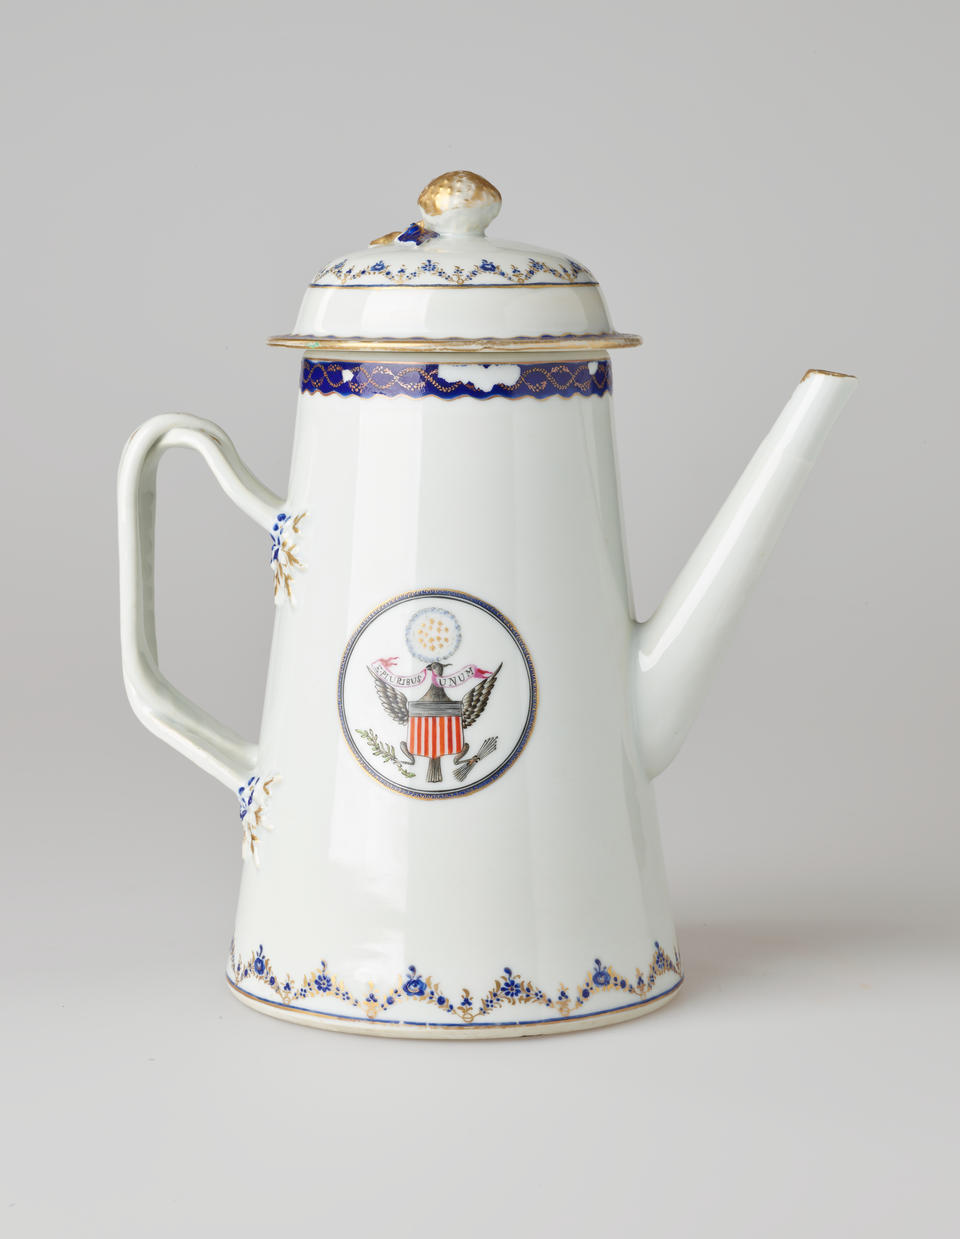 A white ceramic coffee pot with dark blue and gilded decorations, a straight spout, angular handle, and heraldry imagery in a circle on the body of the coffee pot.